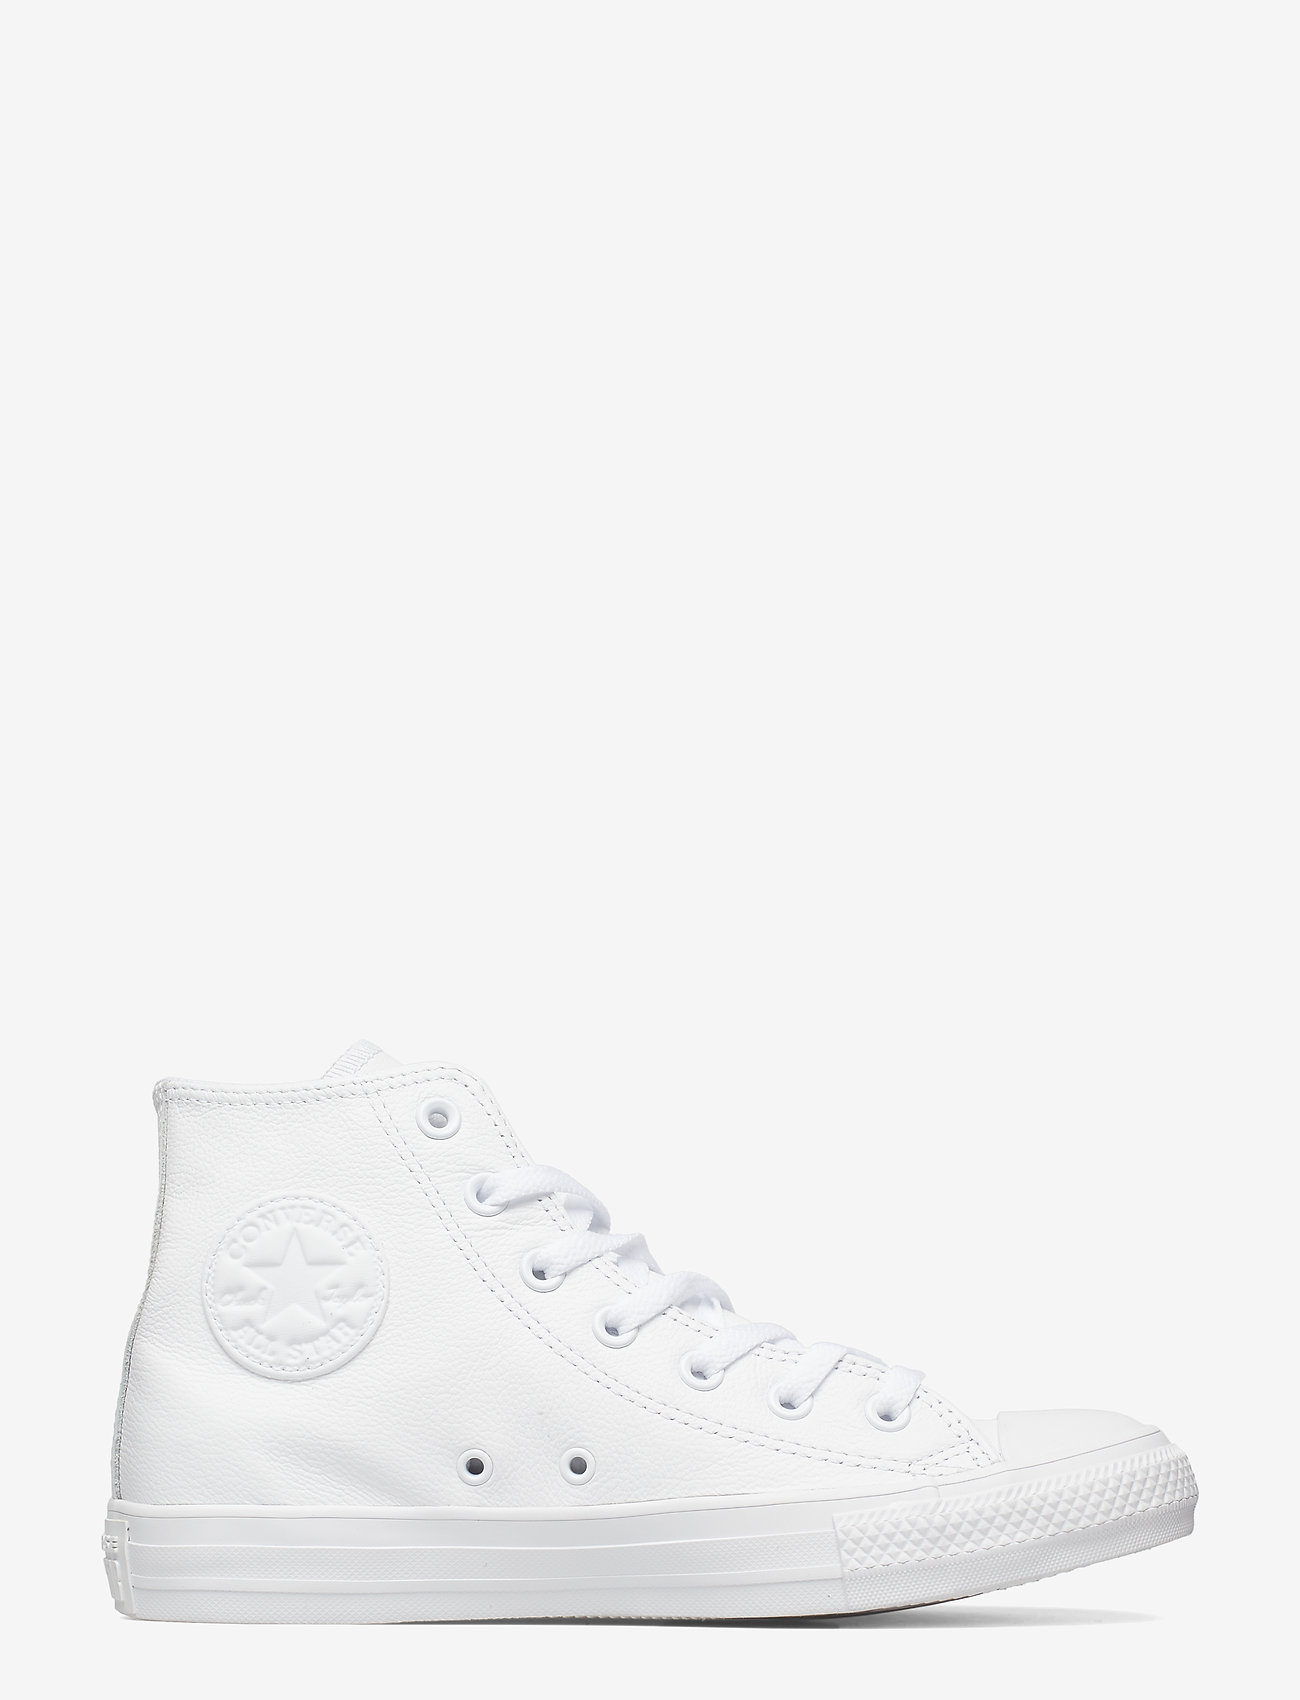 Converse - Chuck Taylor All Star Leather - høje sneakers - white monochrome - 1